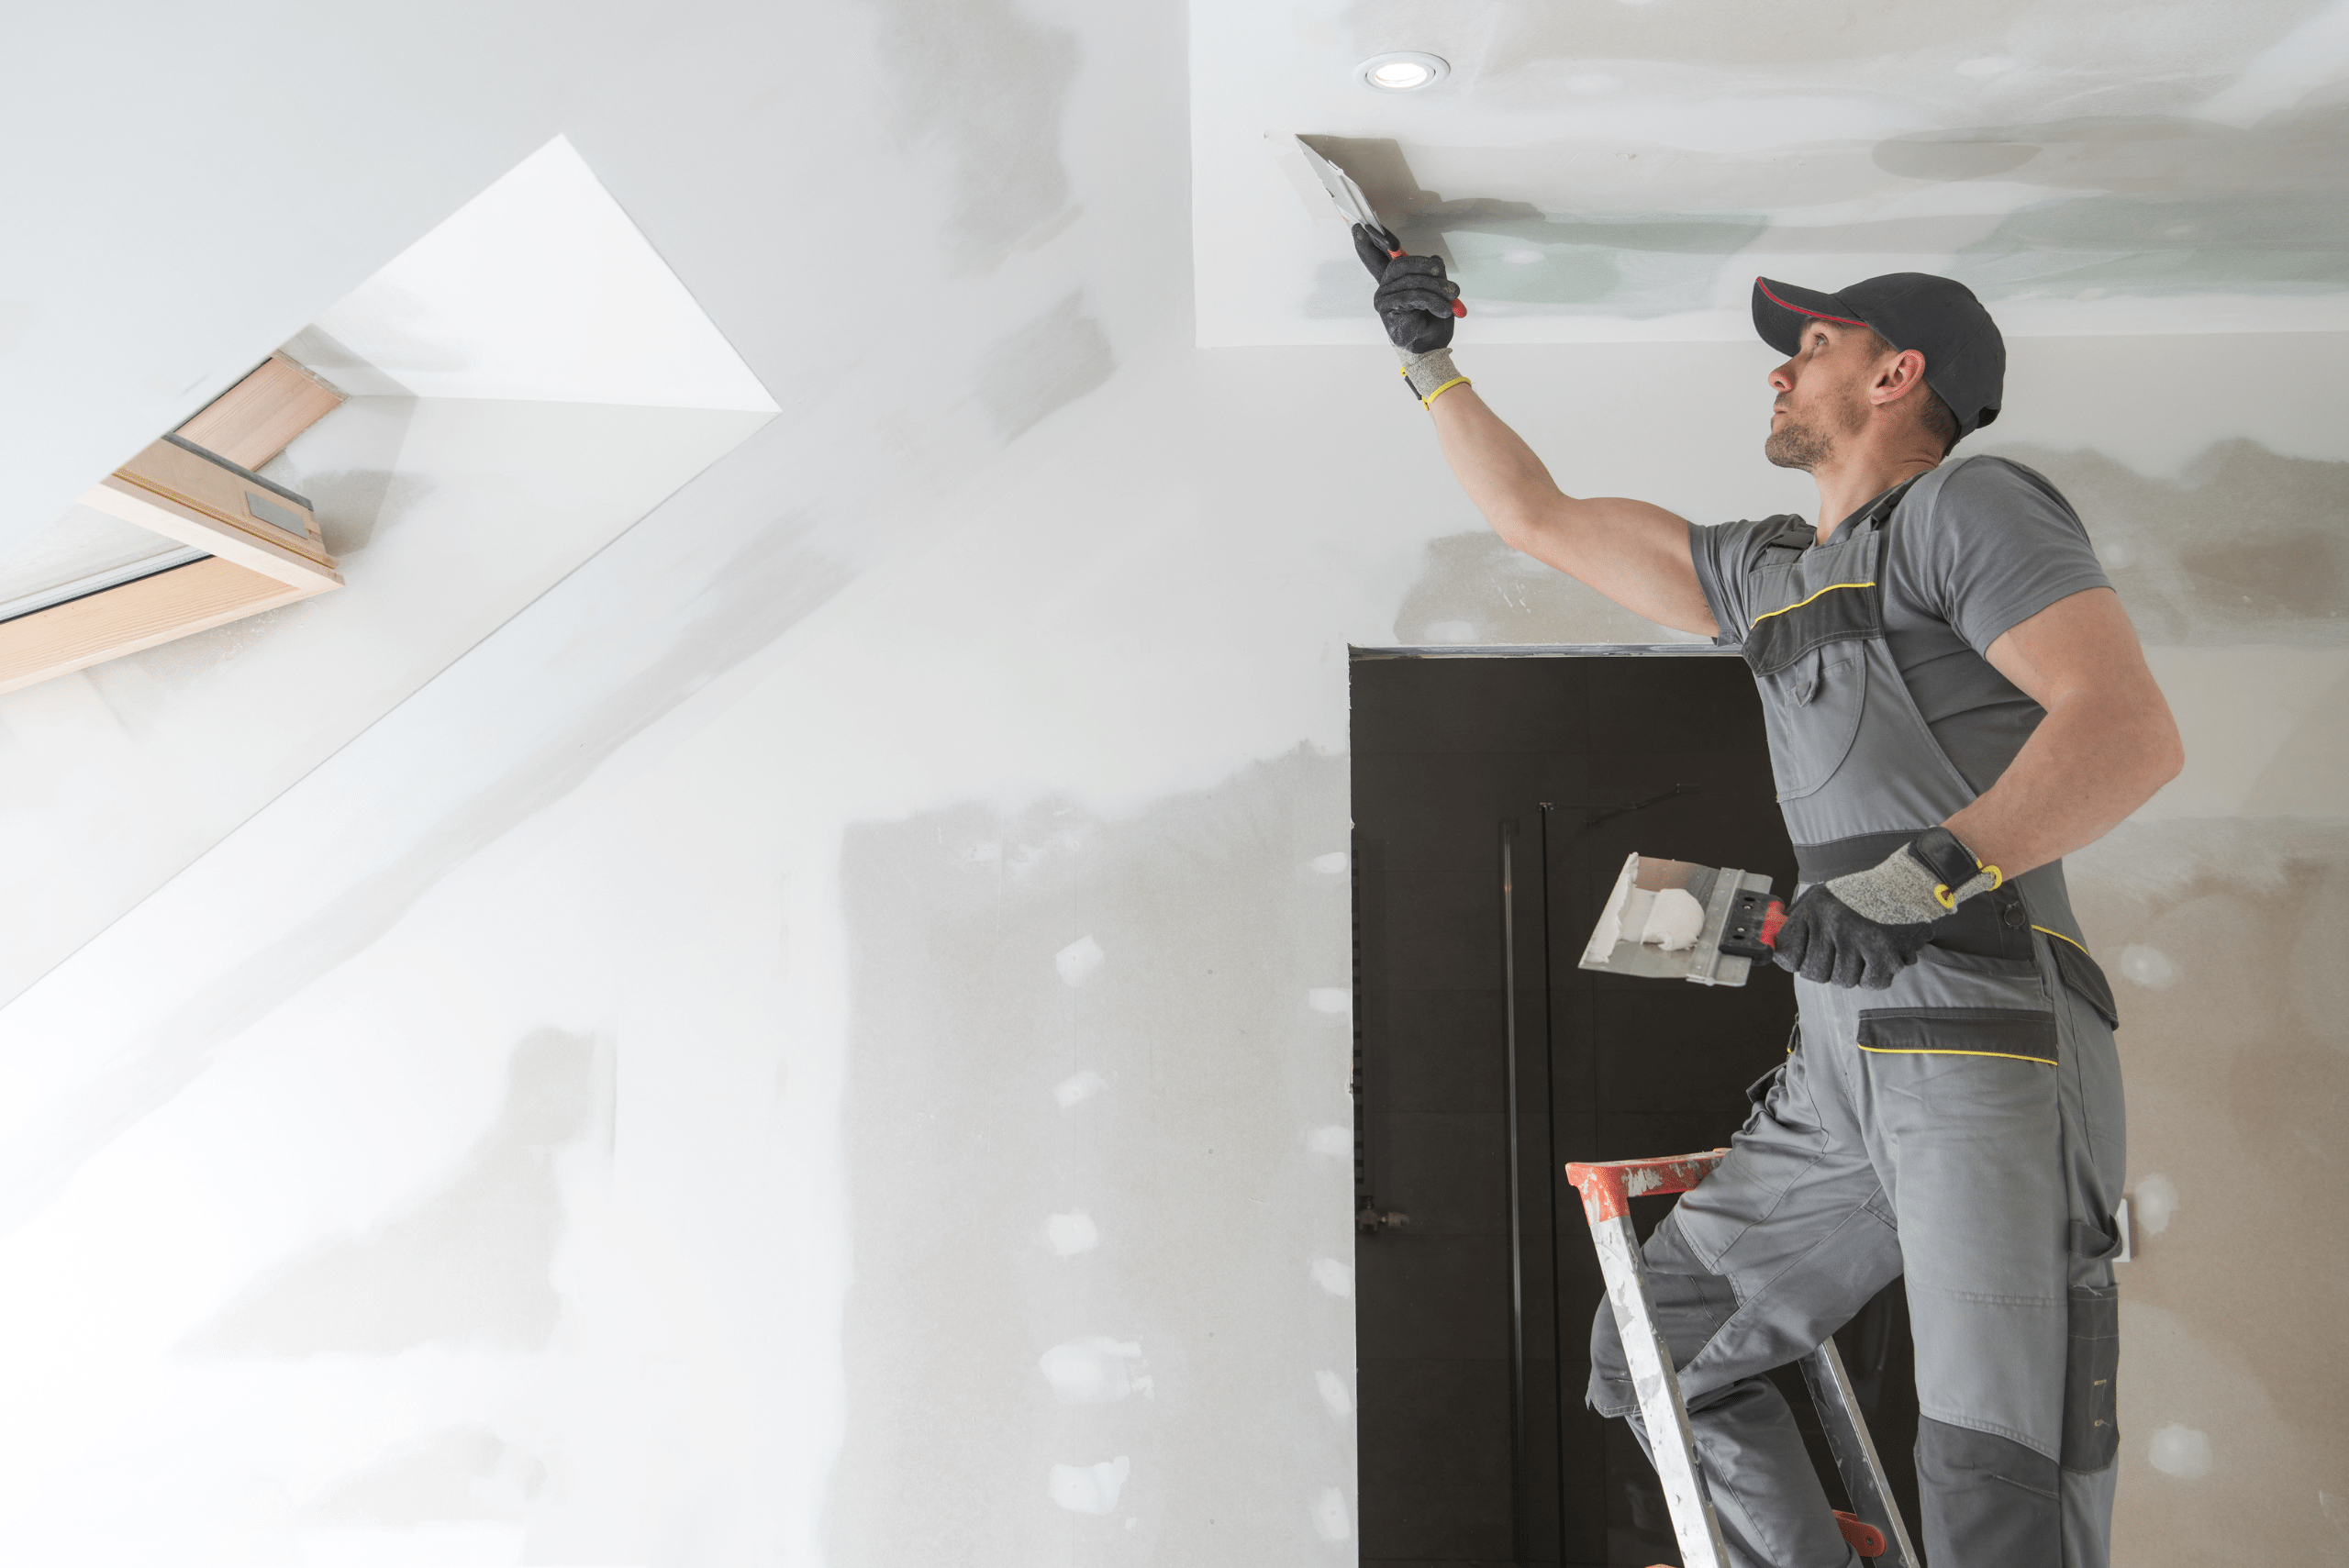 A person using drywall compound to smooth out drywall.